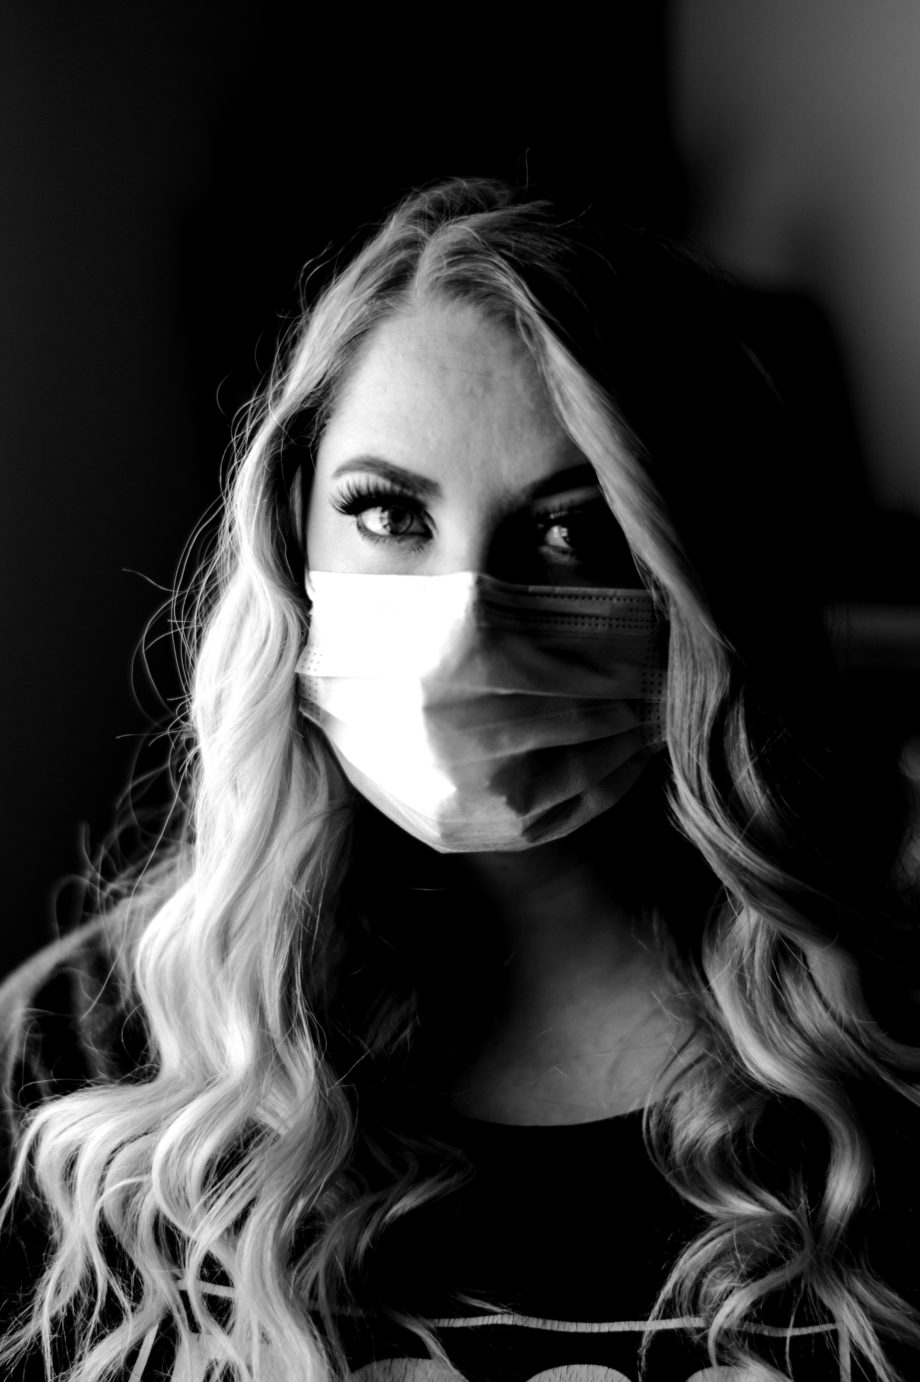 5 easy things to do for your photography business Misty C wearing a mask